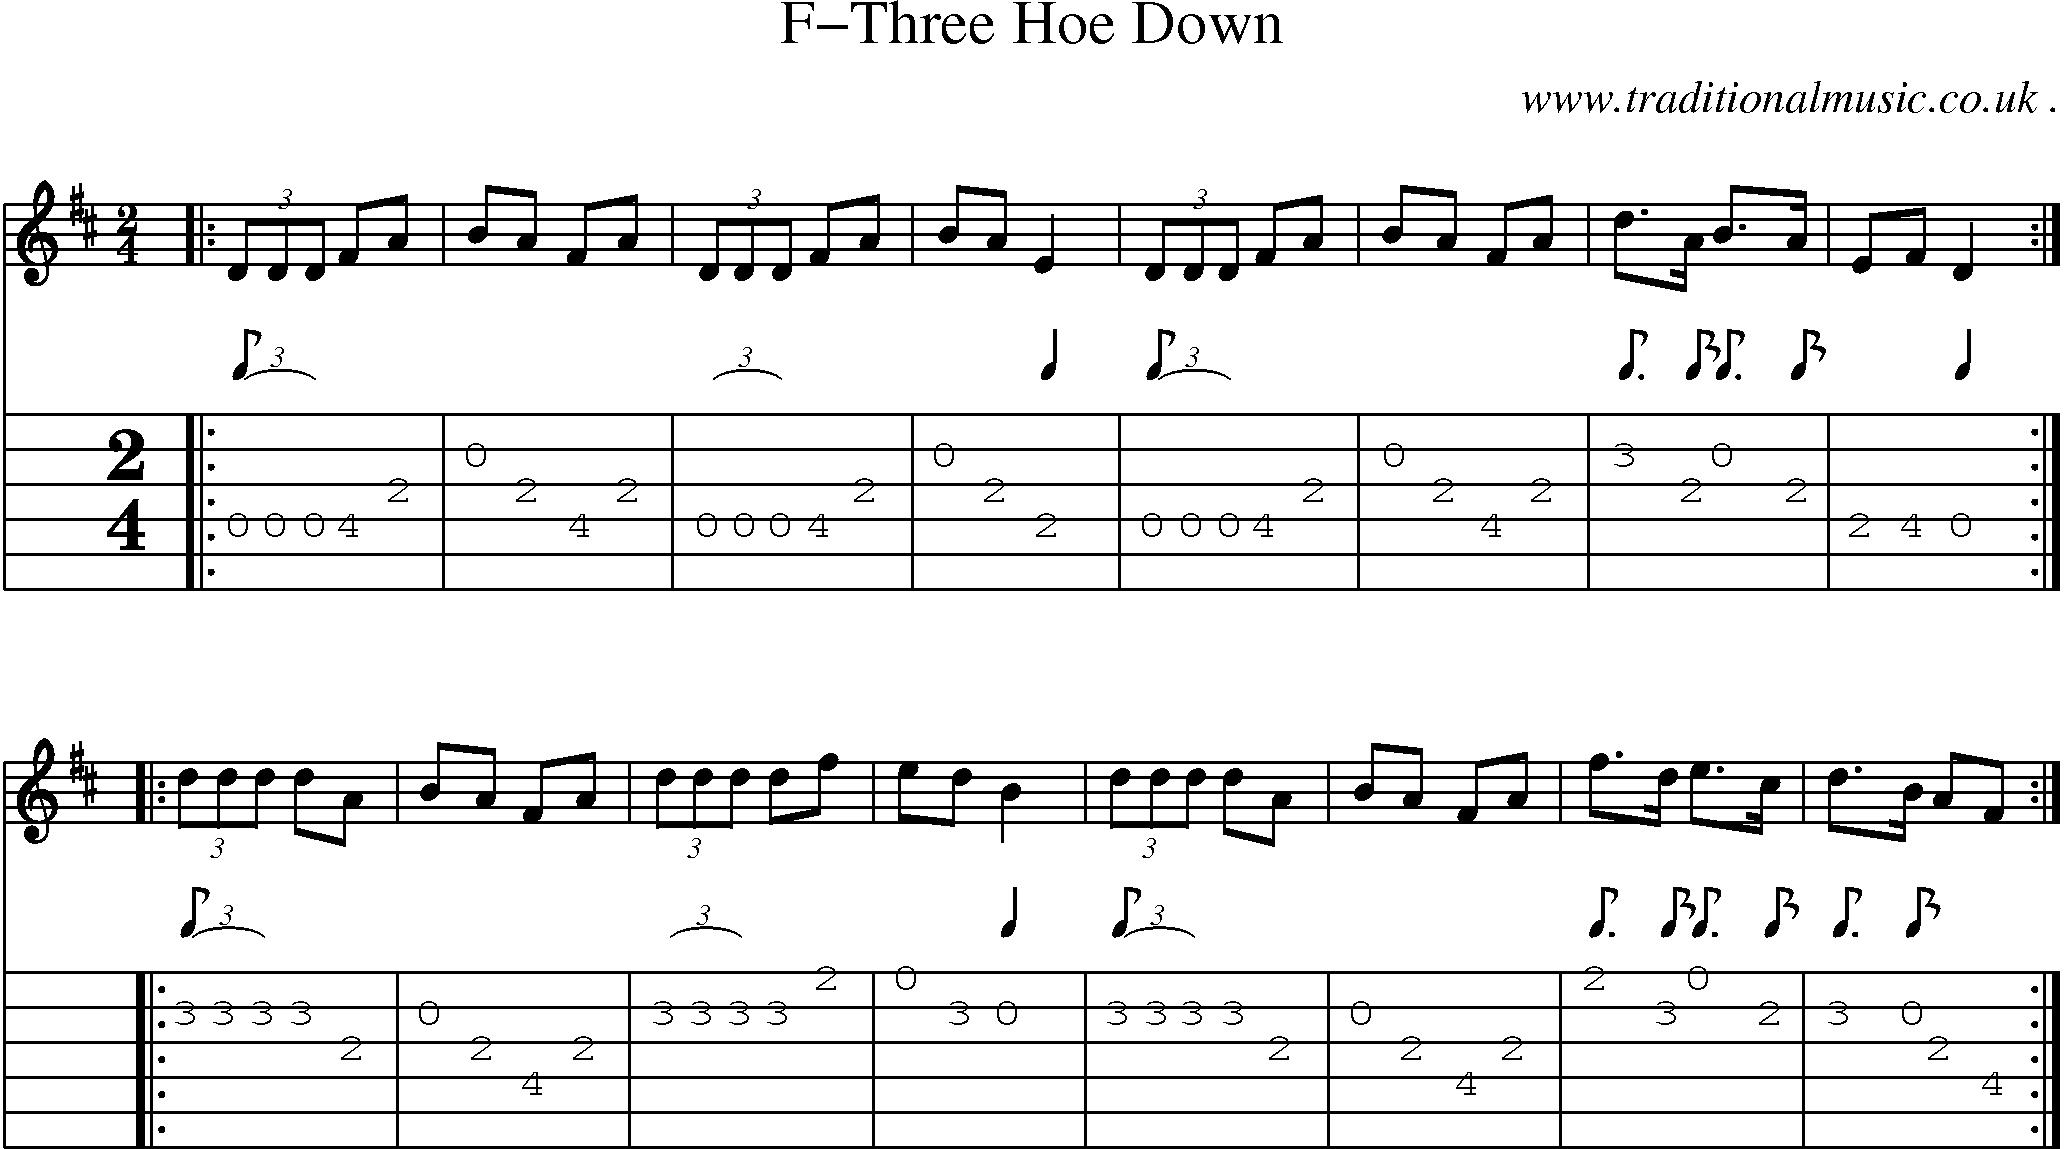 Music Score and Guitar Tabs for F-three Hoe Down